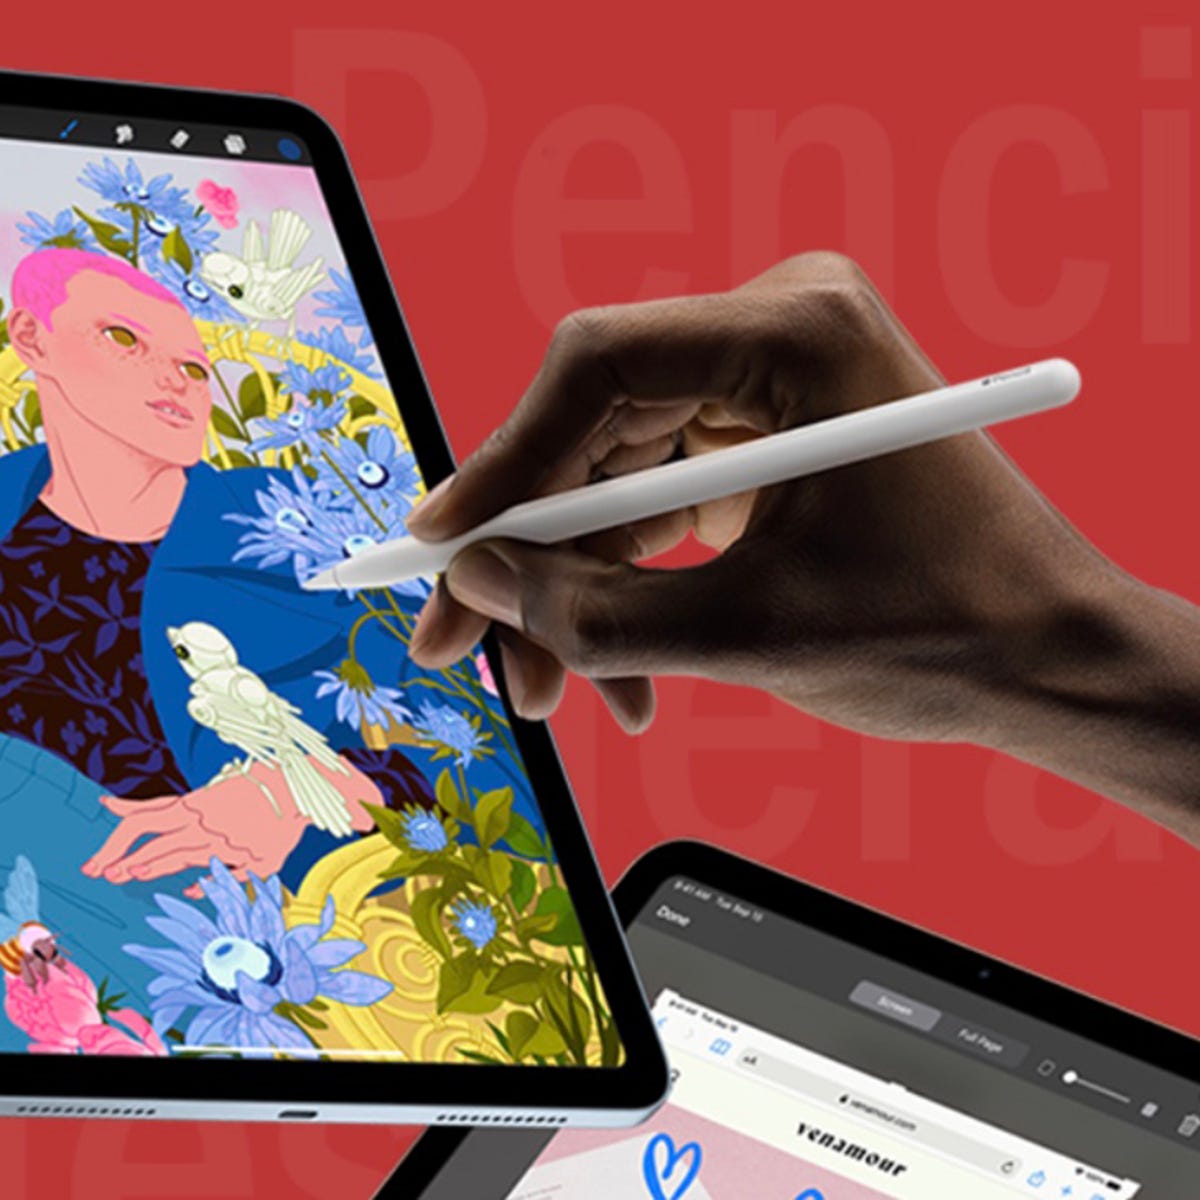 page Creed Devour apple pencil models texture protect Teenage years